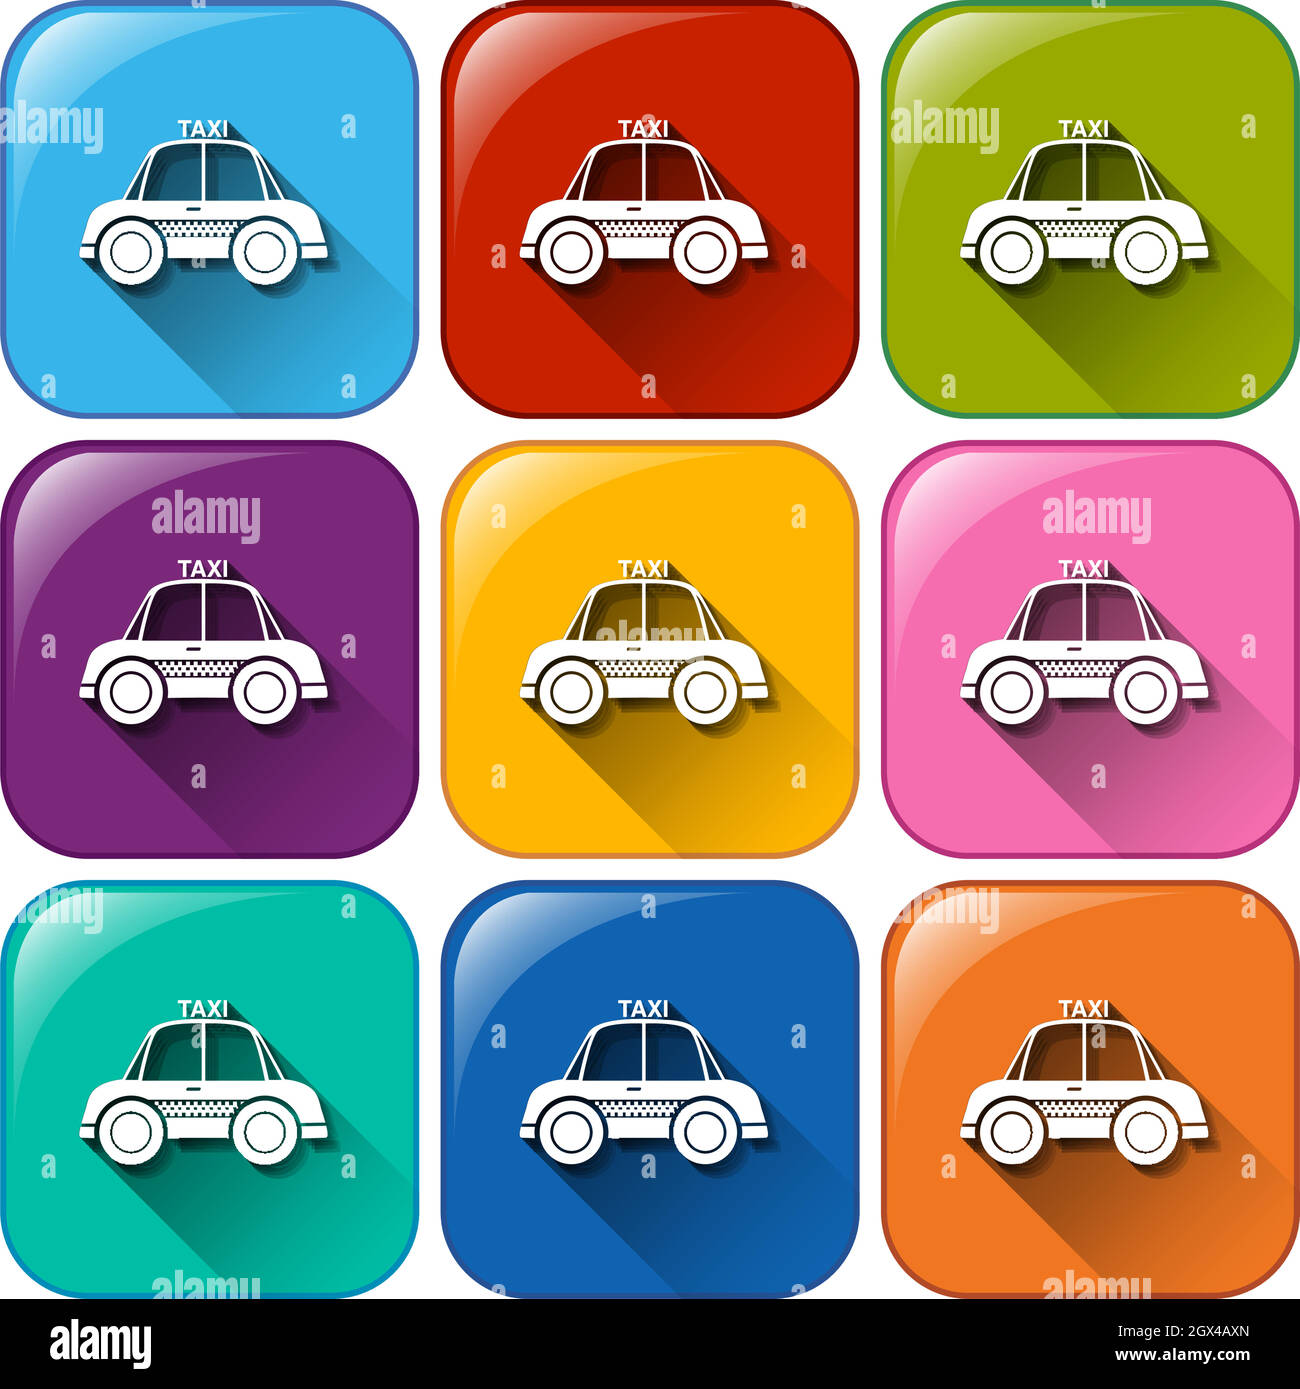 Buttons with taxi cabs Stock Vector